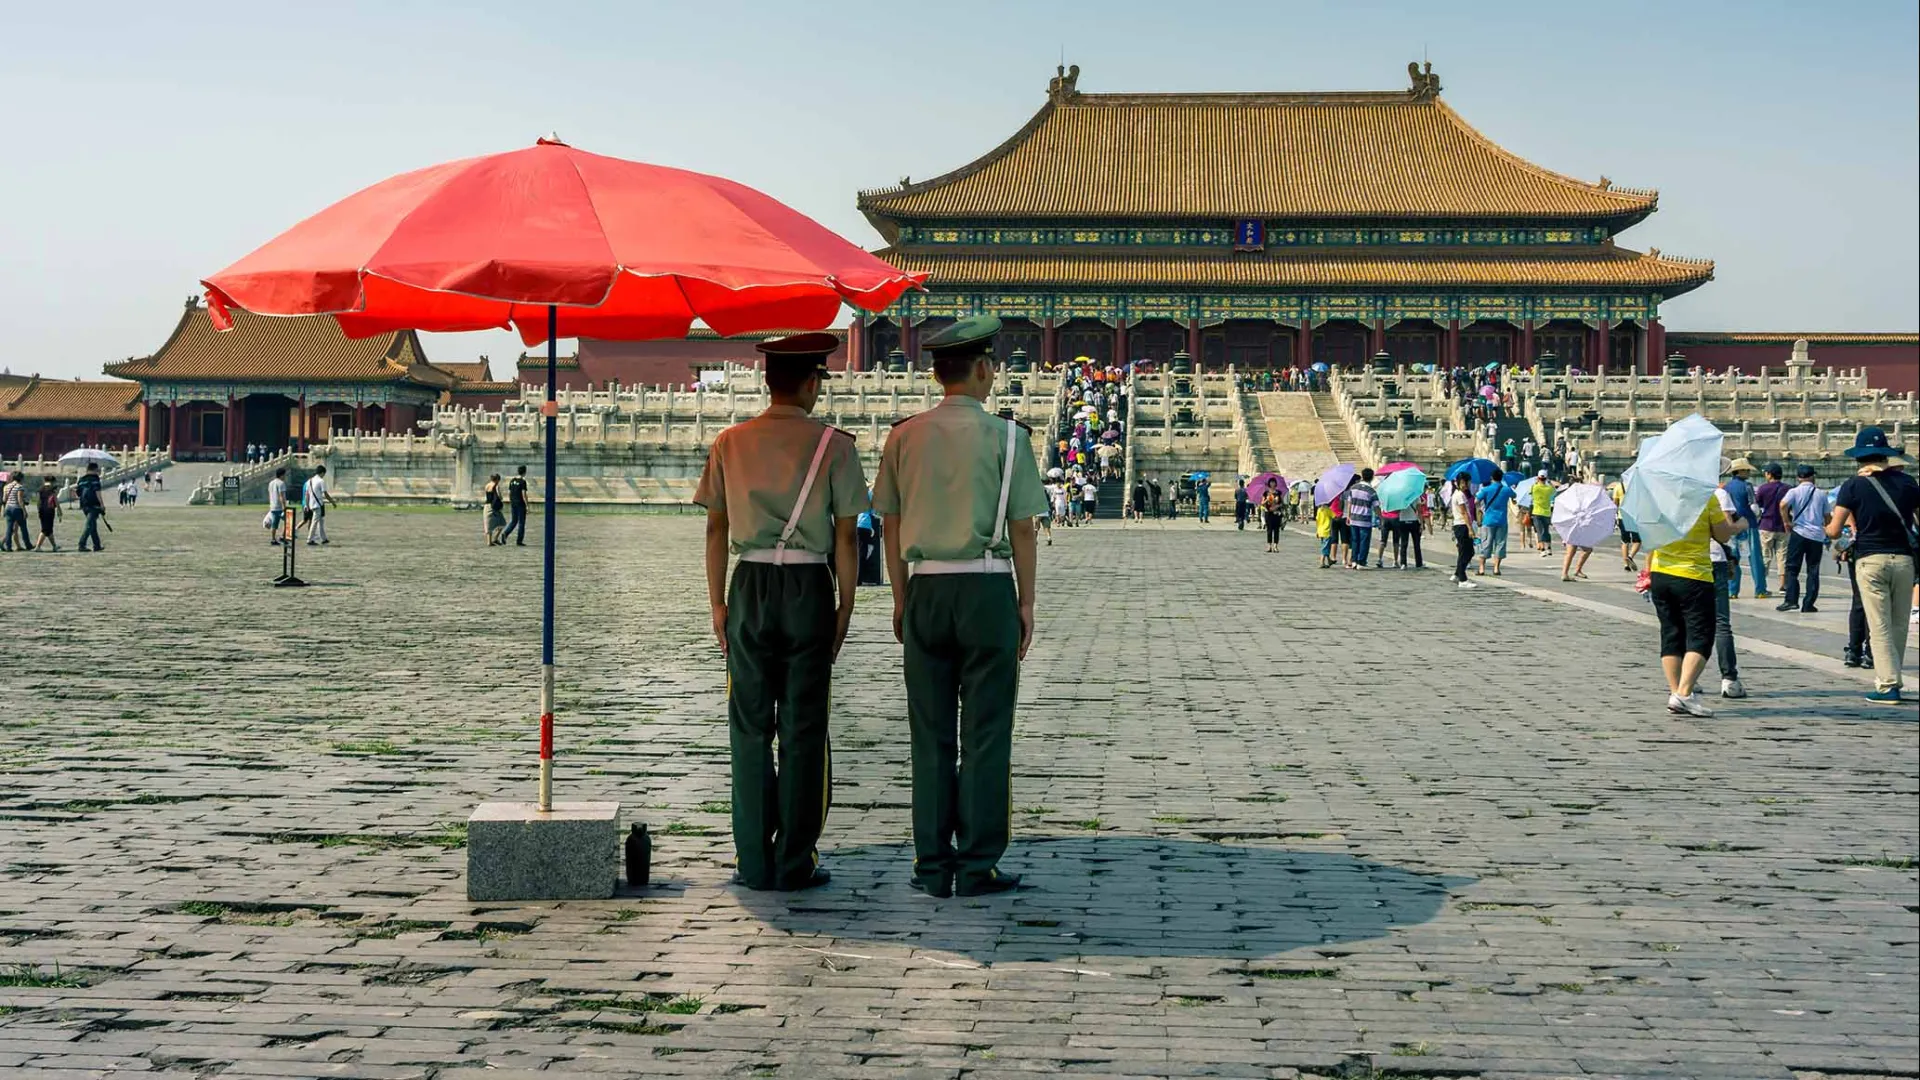 Police officers watch over visitors to the Forbidden City in Beijing, China. 